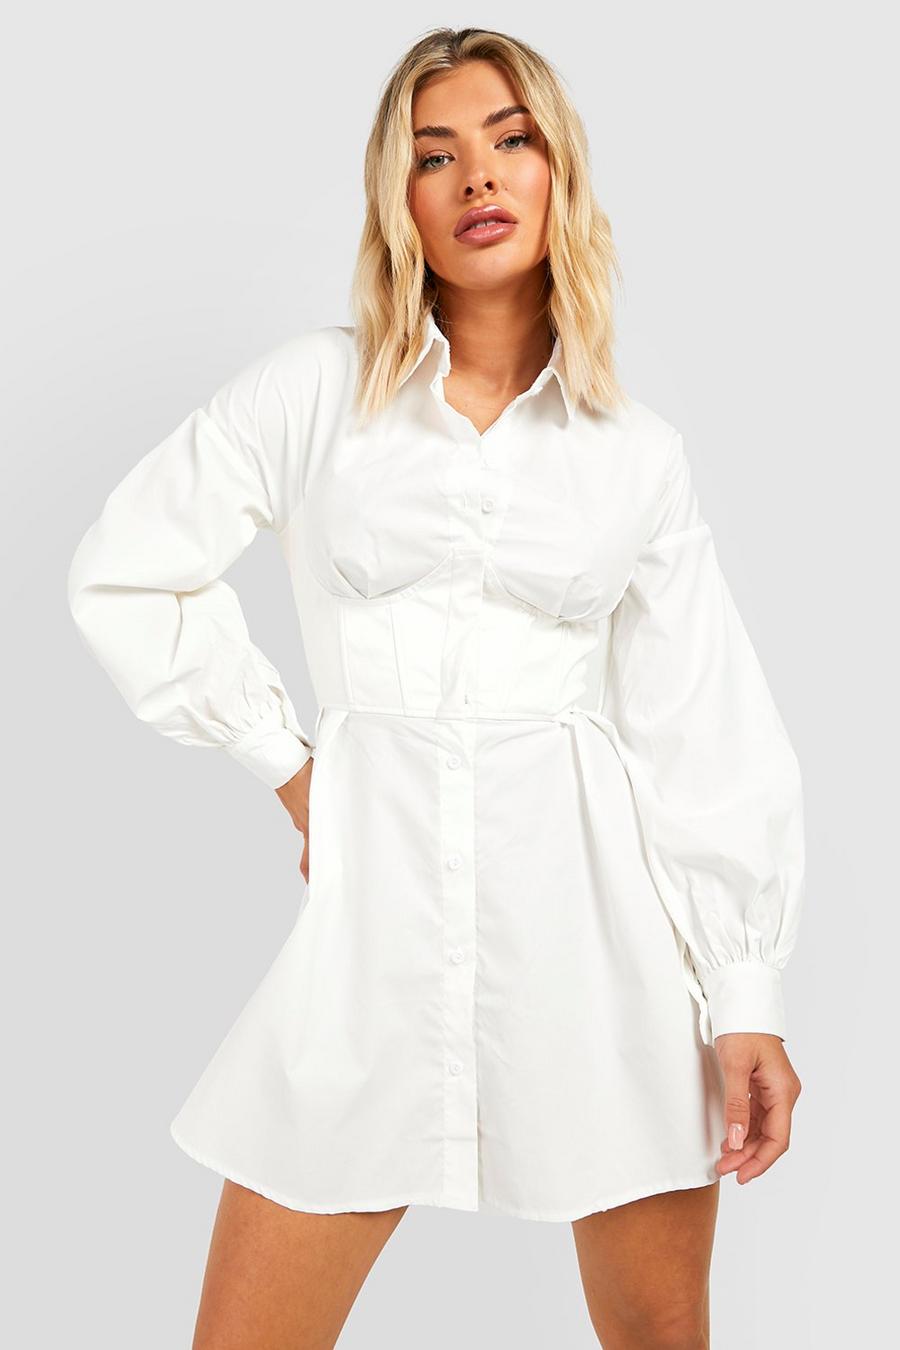 Ivory vit Shirt Dress With Leather Look Corset